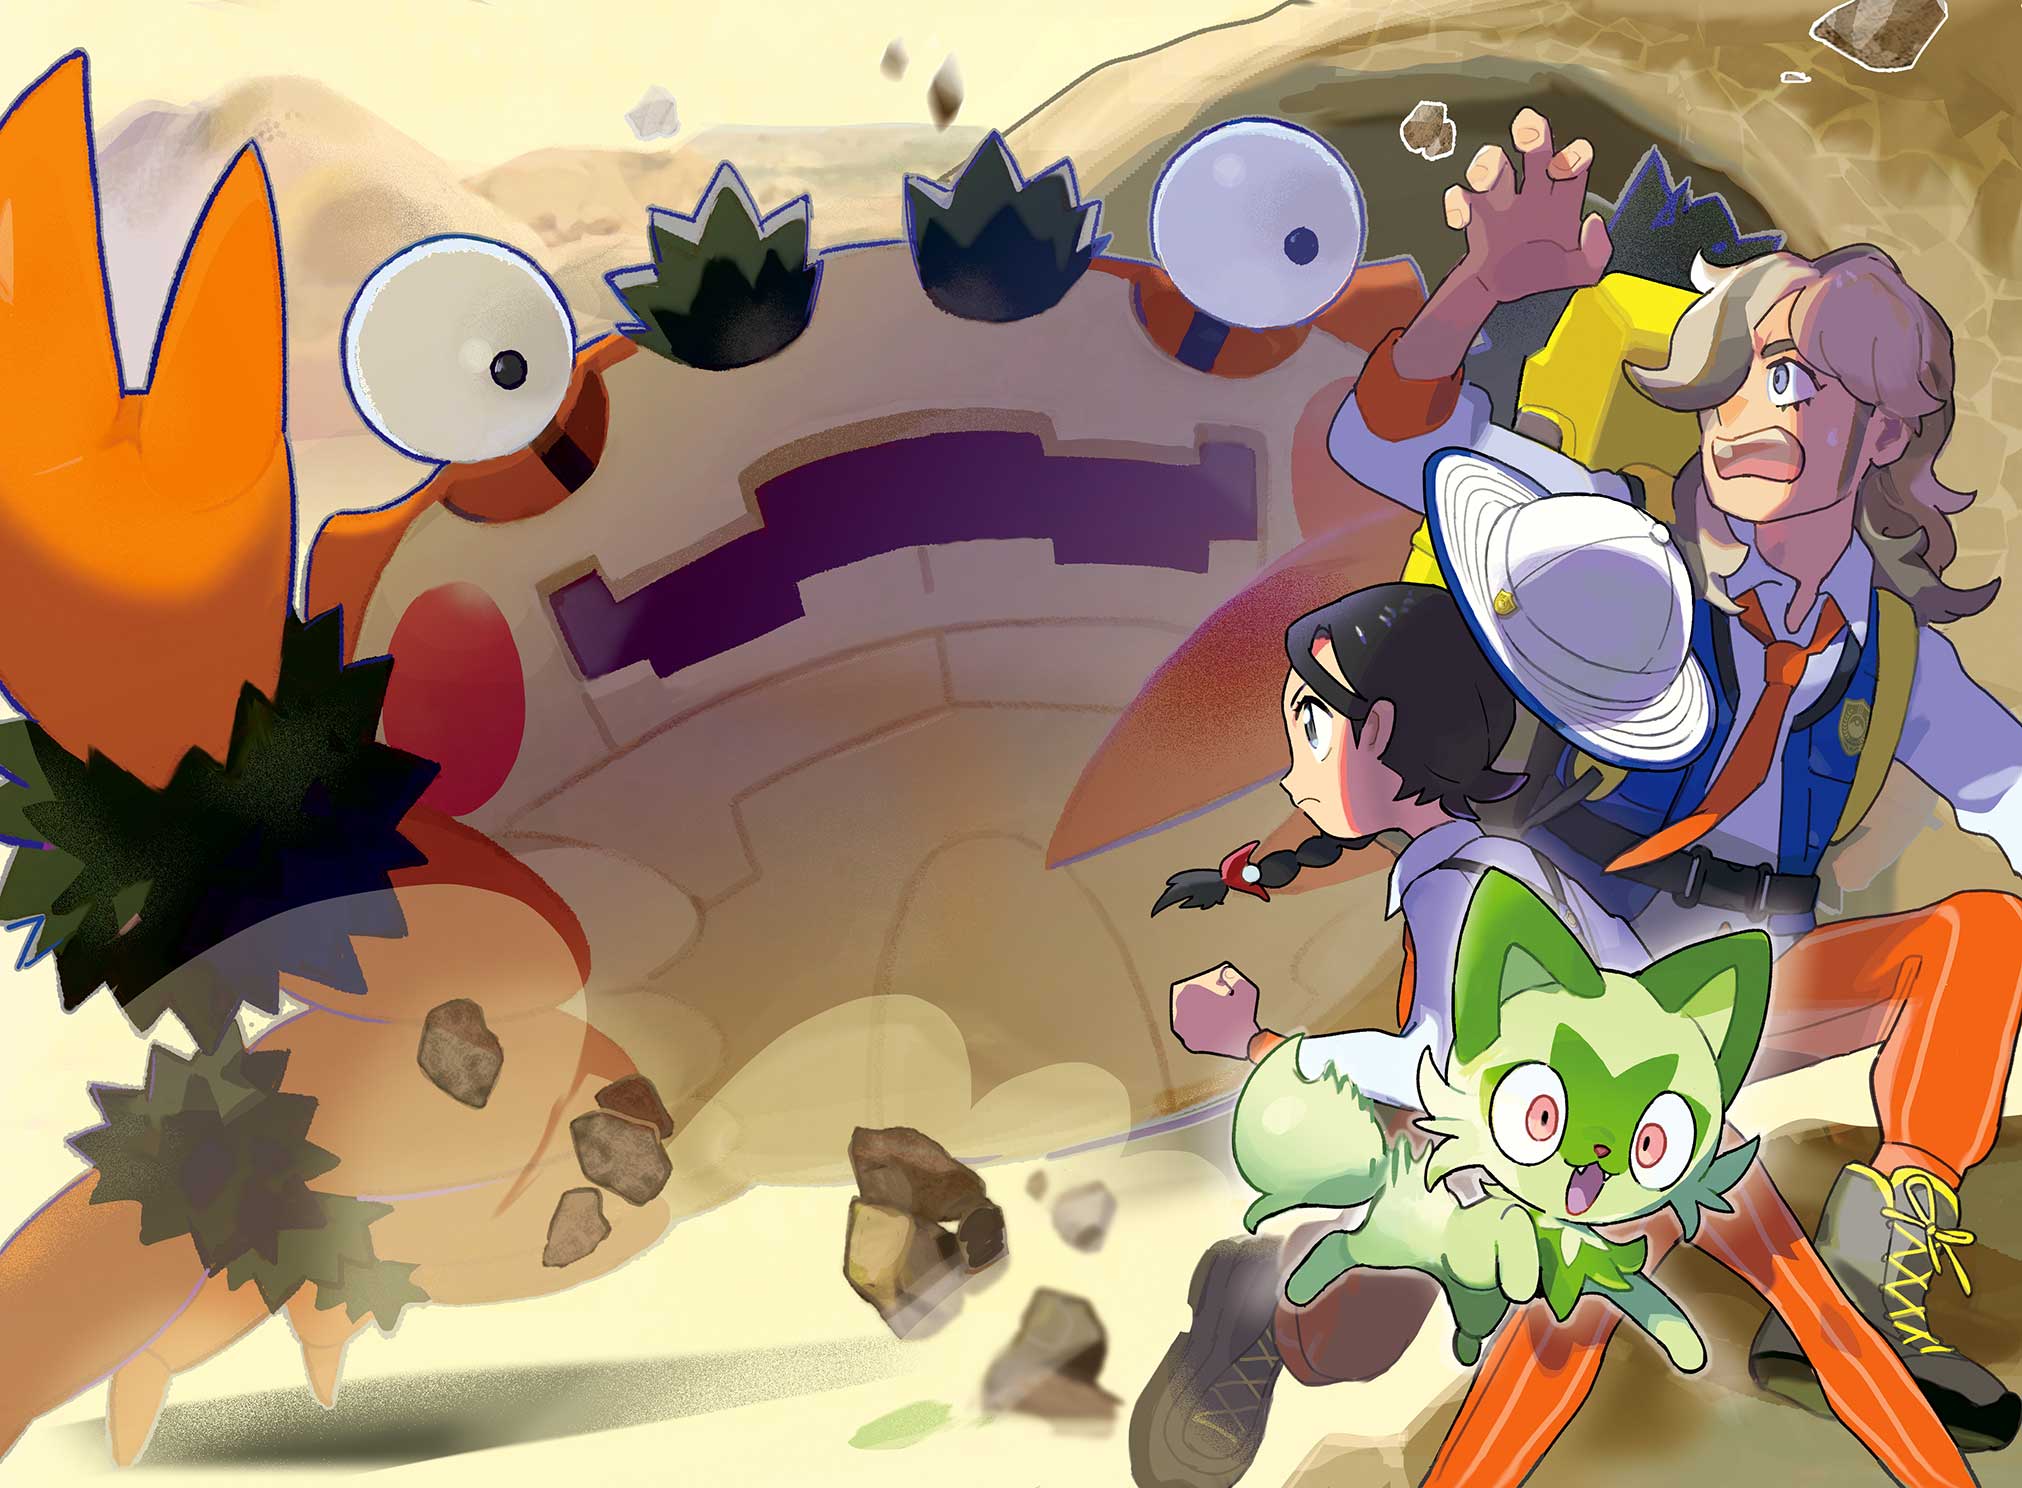 Pokémon Violet and Scarlet review: the open worlds the series has